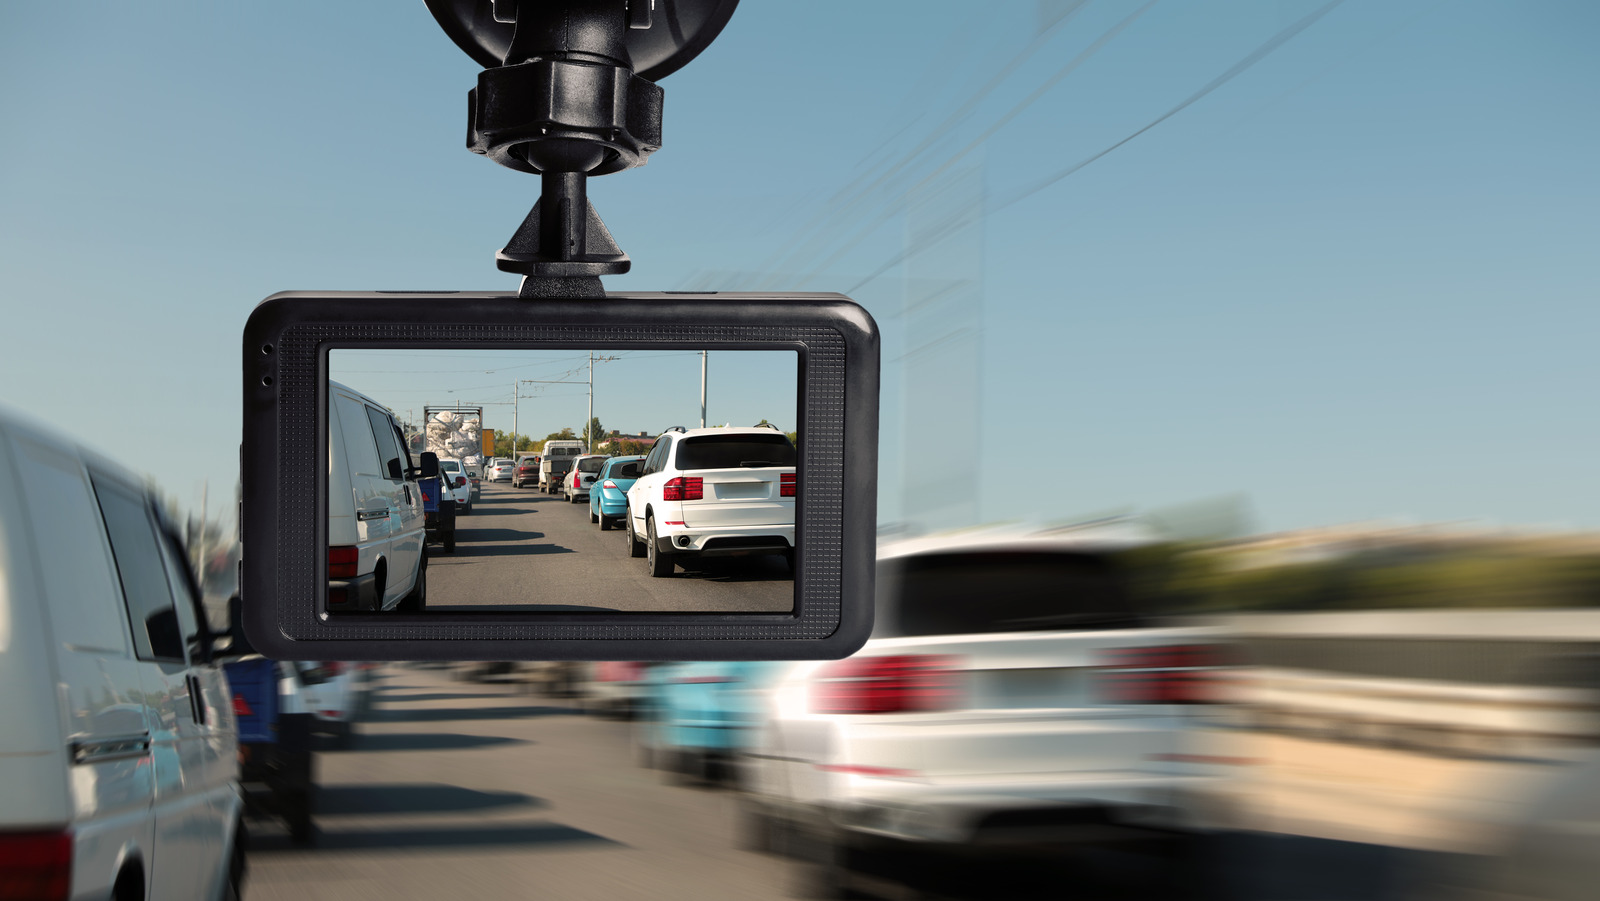 Nexar Pro review: Solid video, cloud storage make this dash cam a good deal